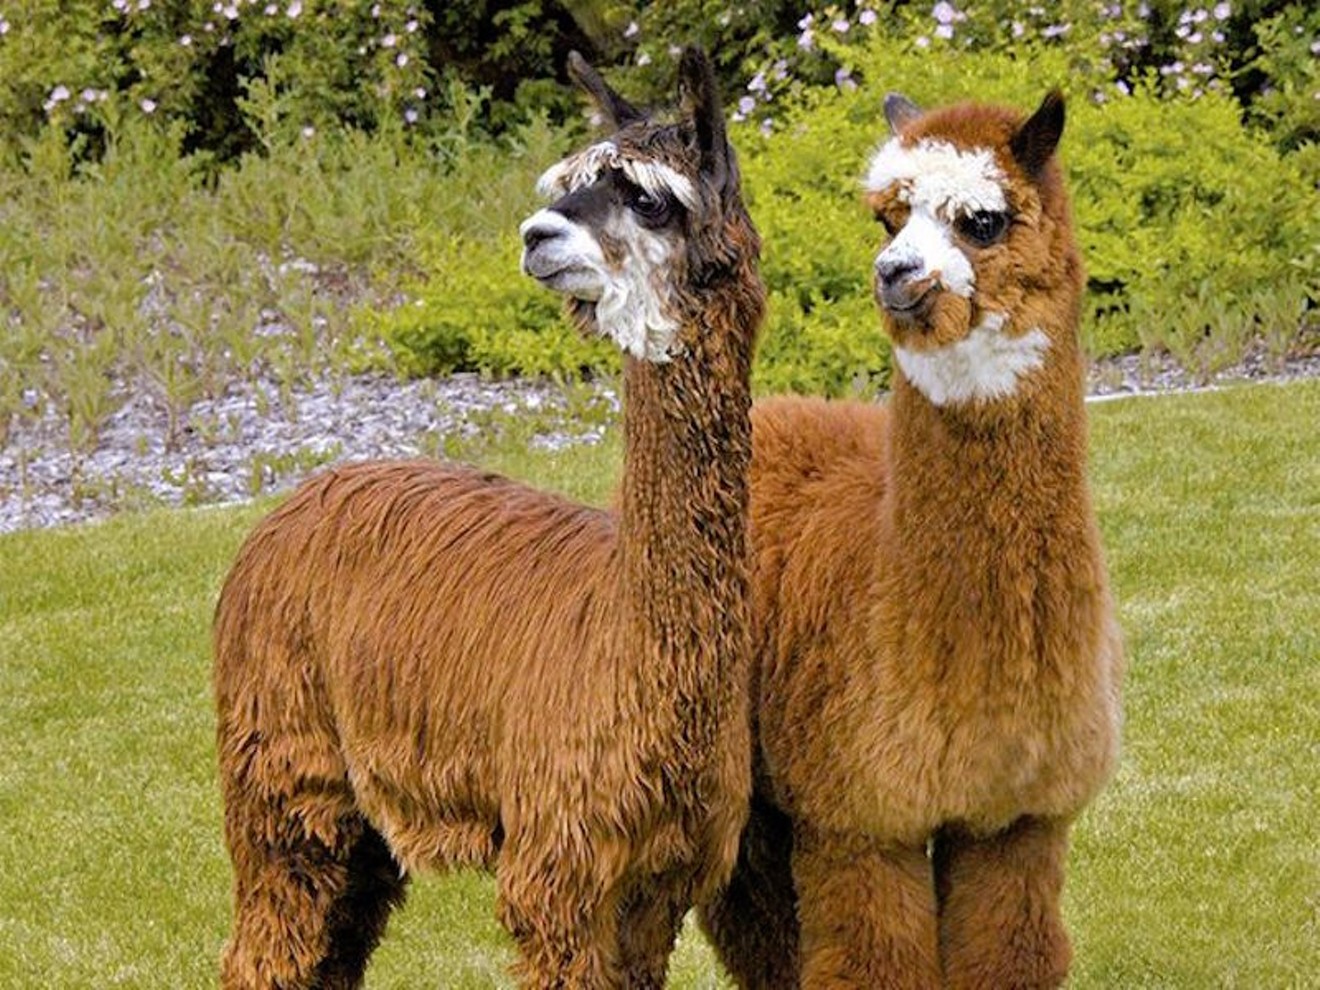 The Great Western Alpaca Show joins forces with the HAHO Market May 5-7 at the National Western Complex.